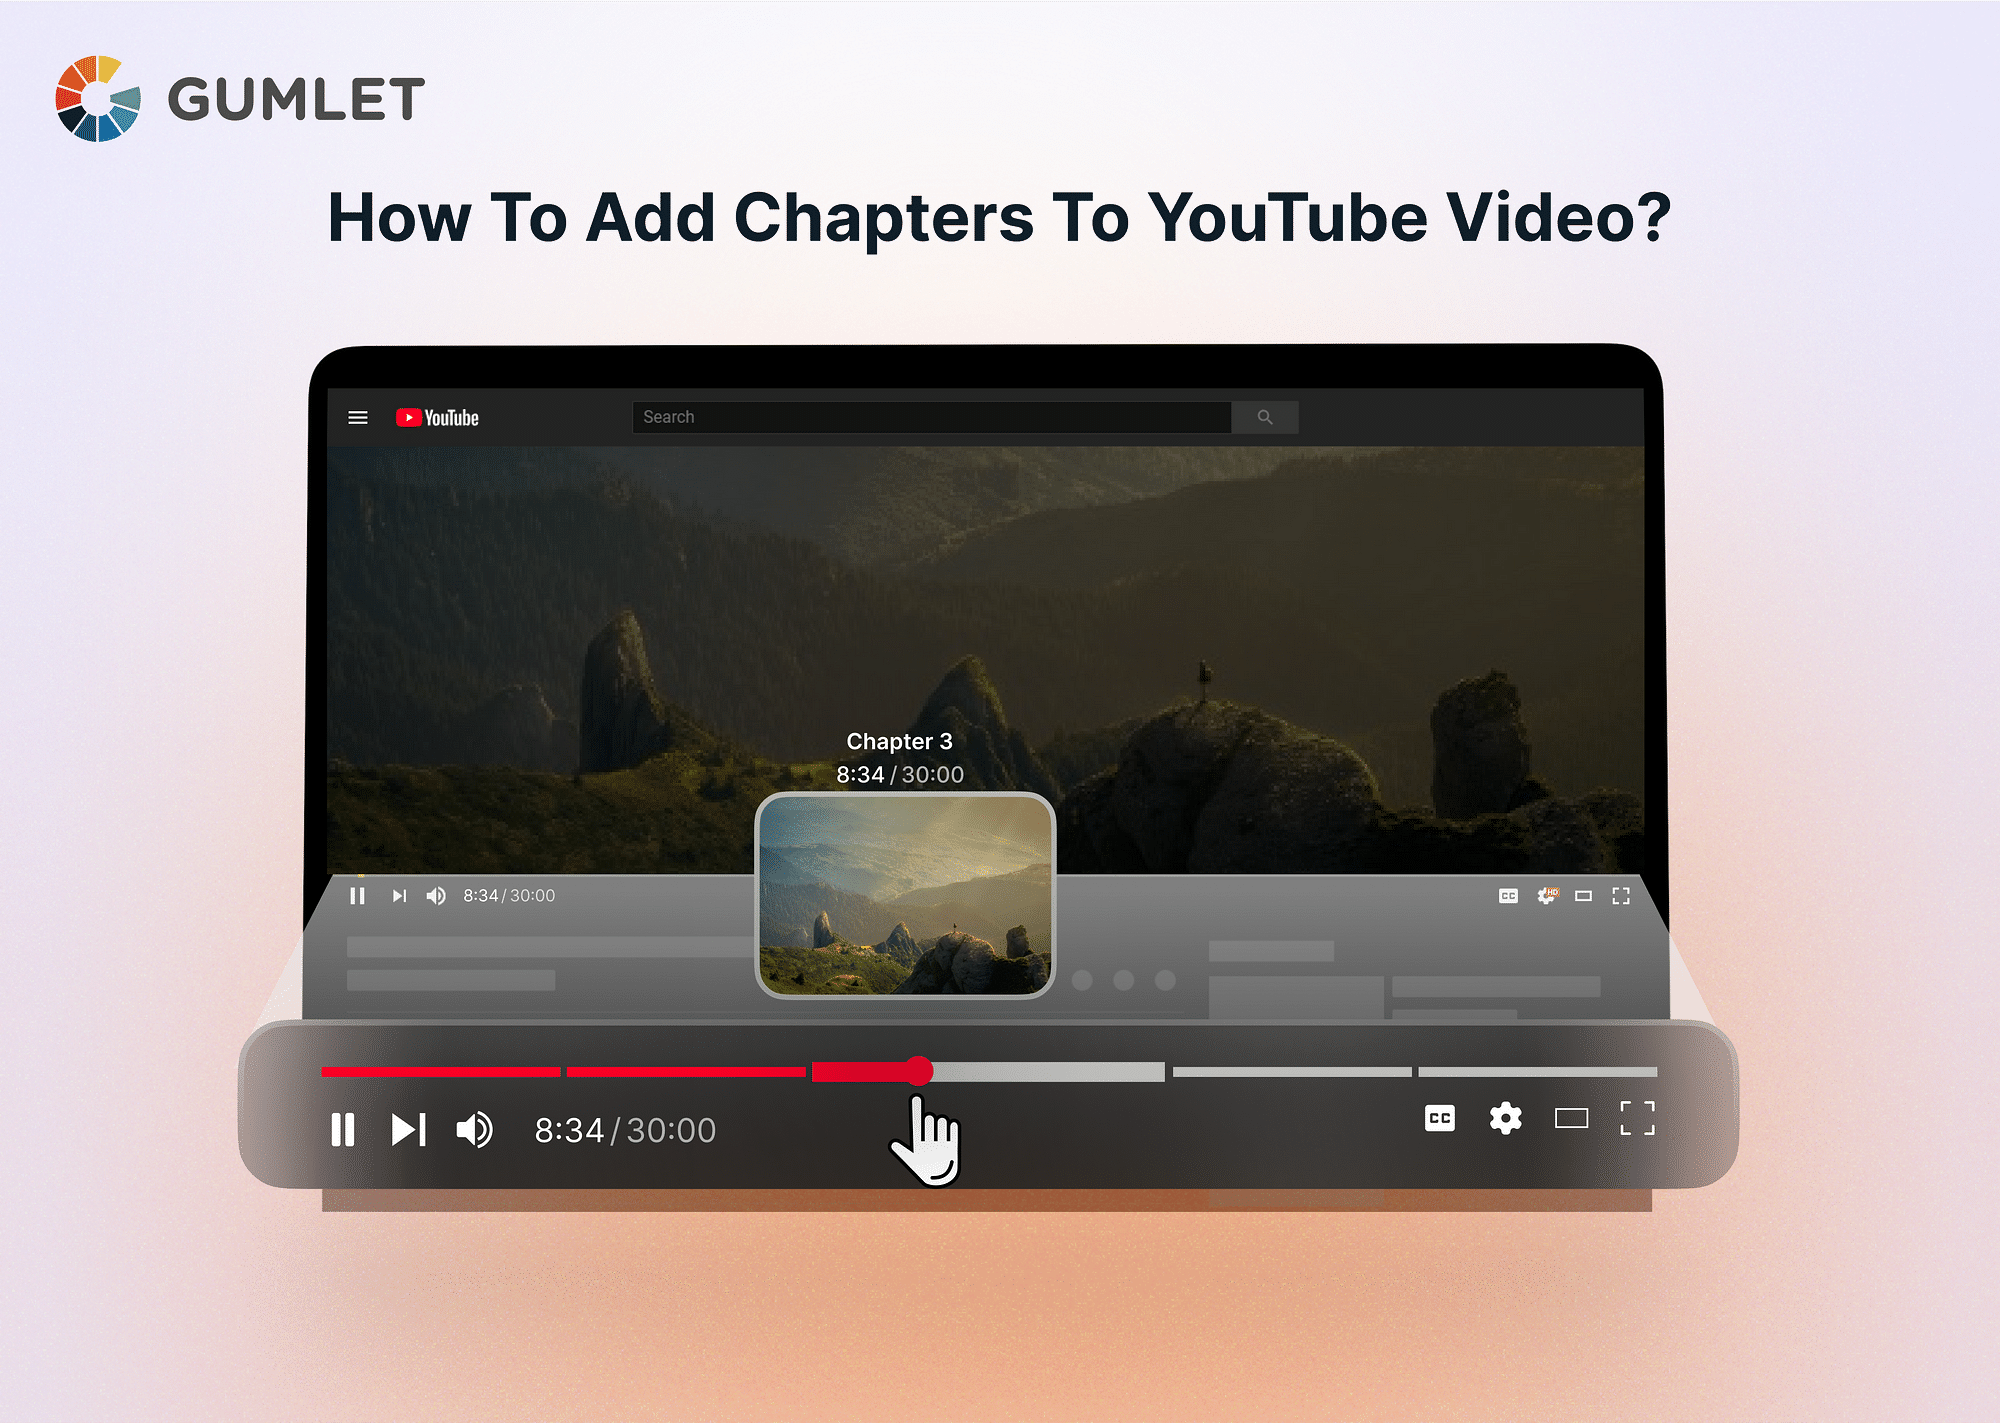 How to add chapters to YouTube Video?